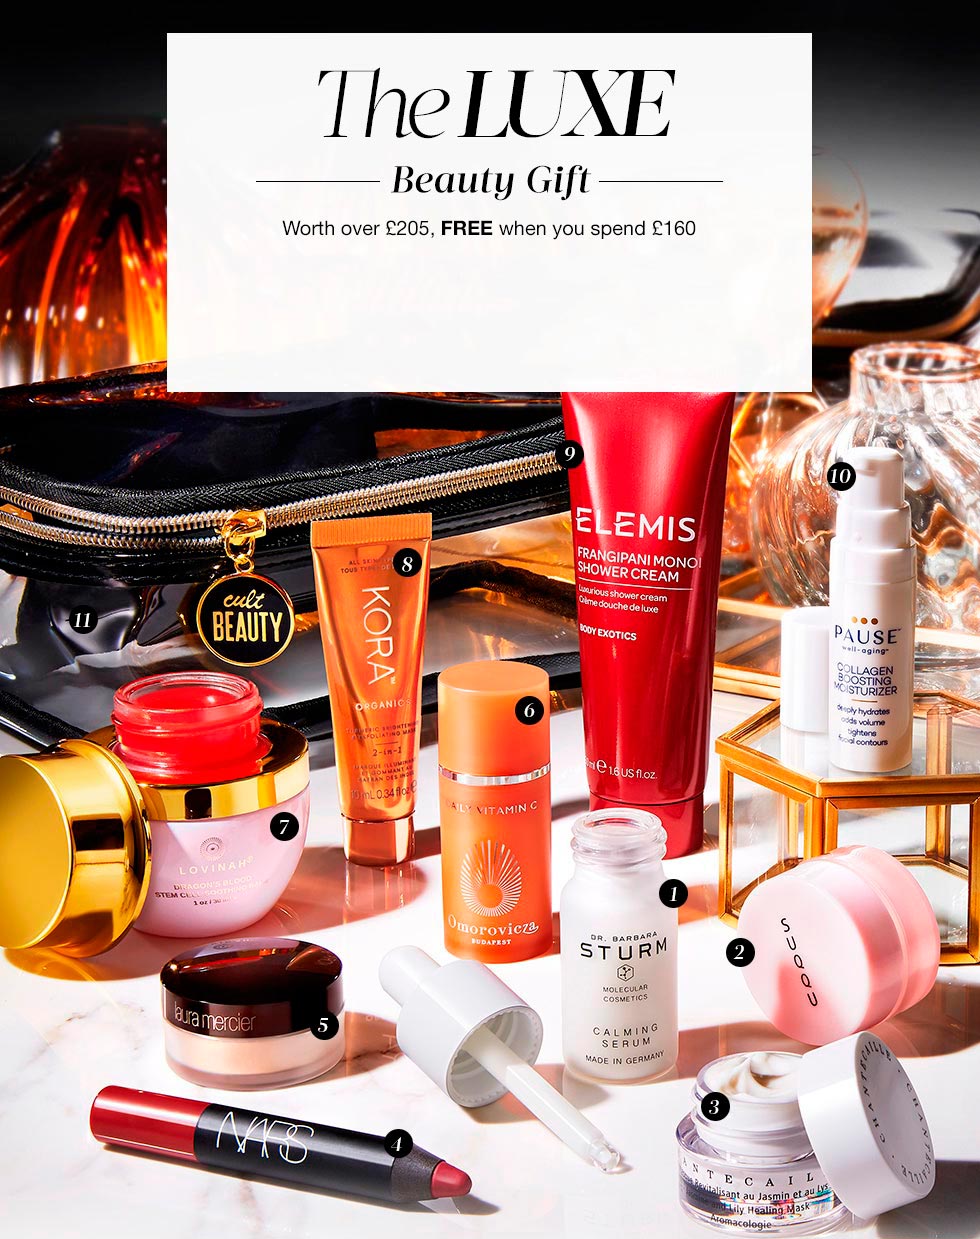 Cult Beauty The Luxe Beauty Gift 2020